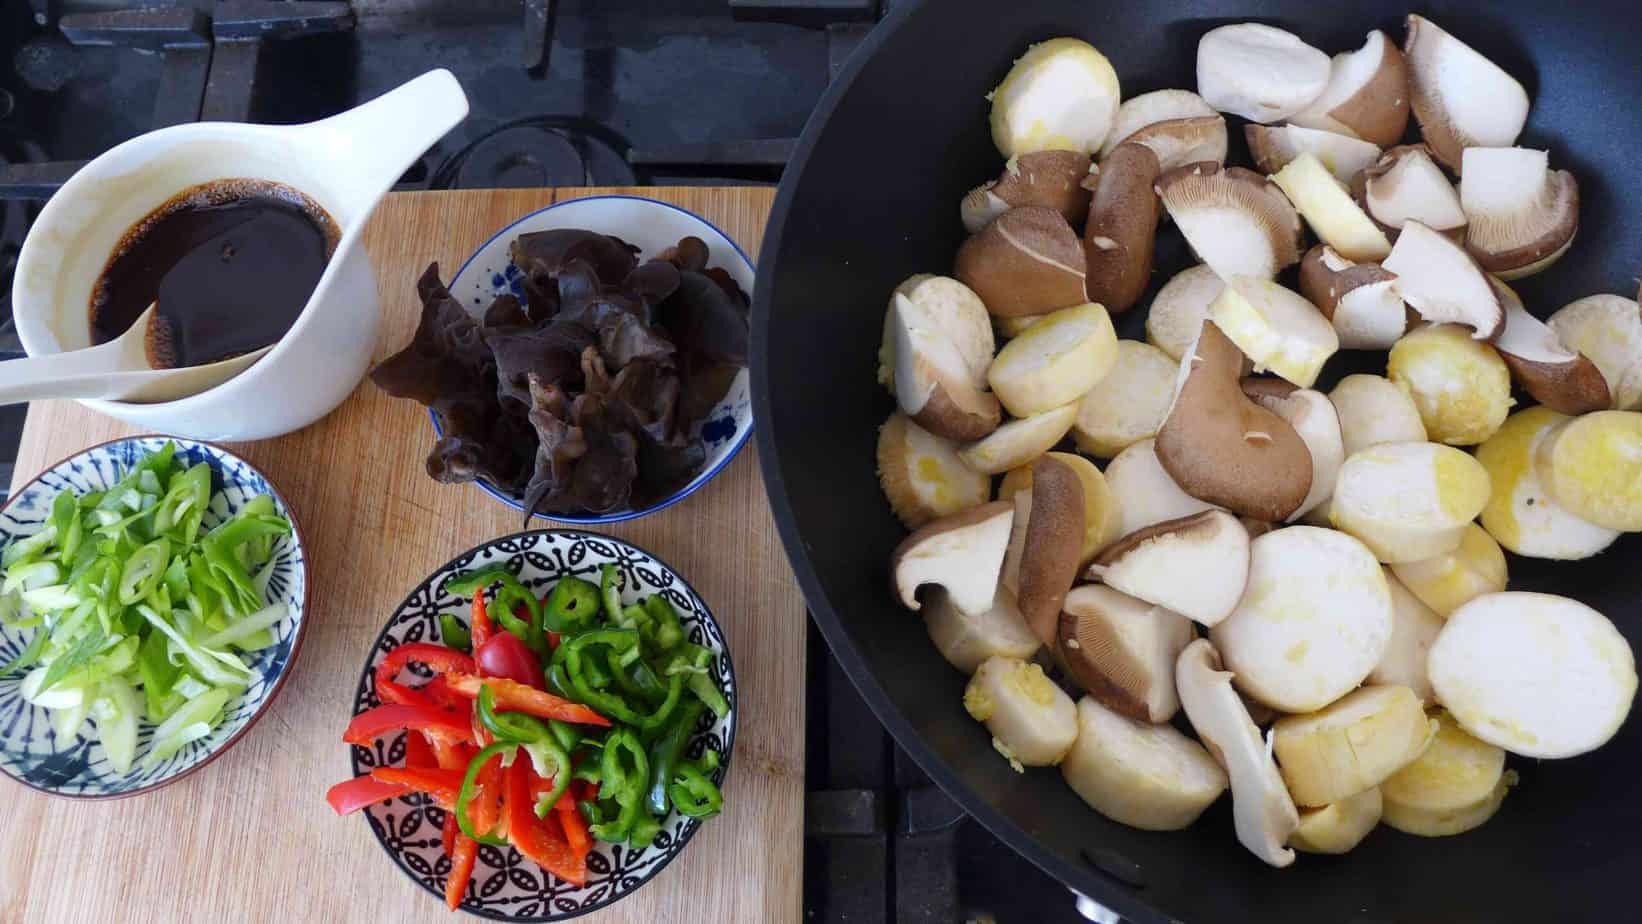 Chopped mushrooms and other ingredients for stir-frying